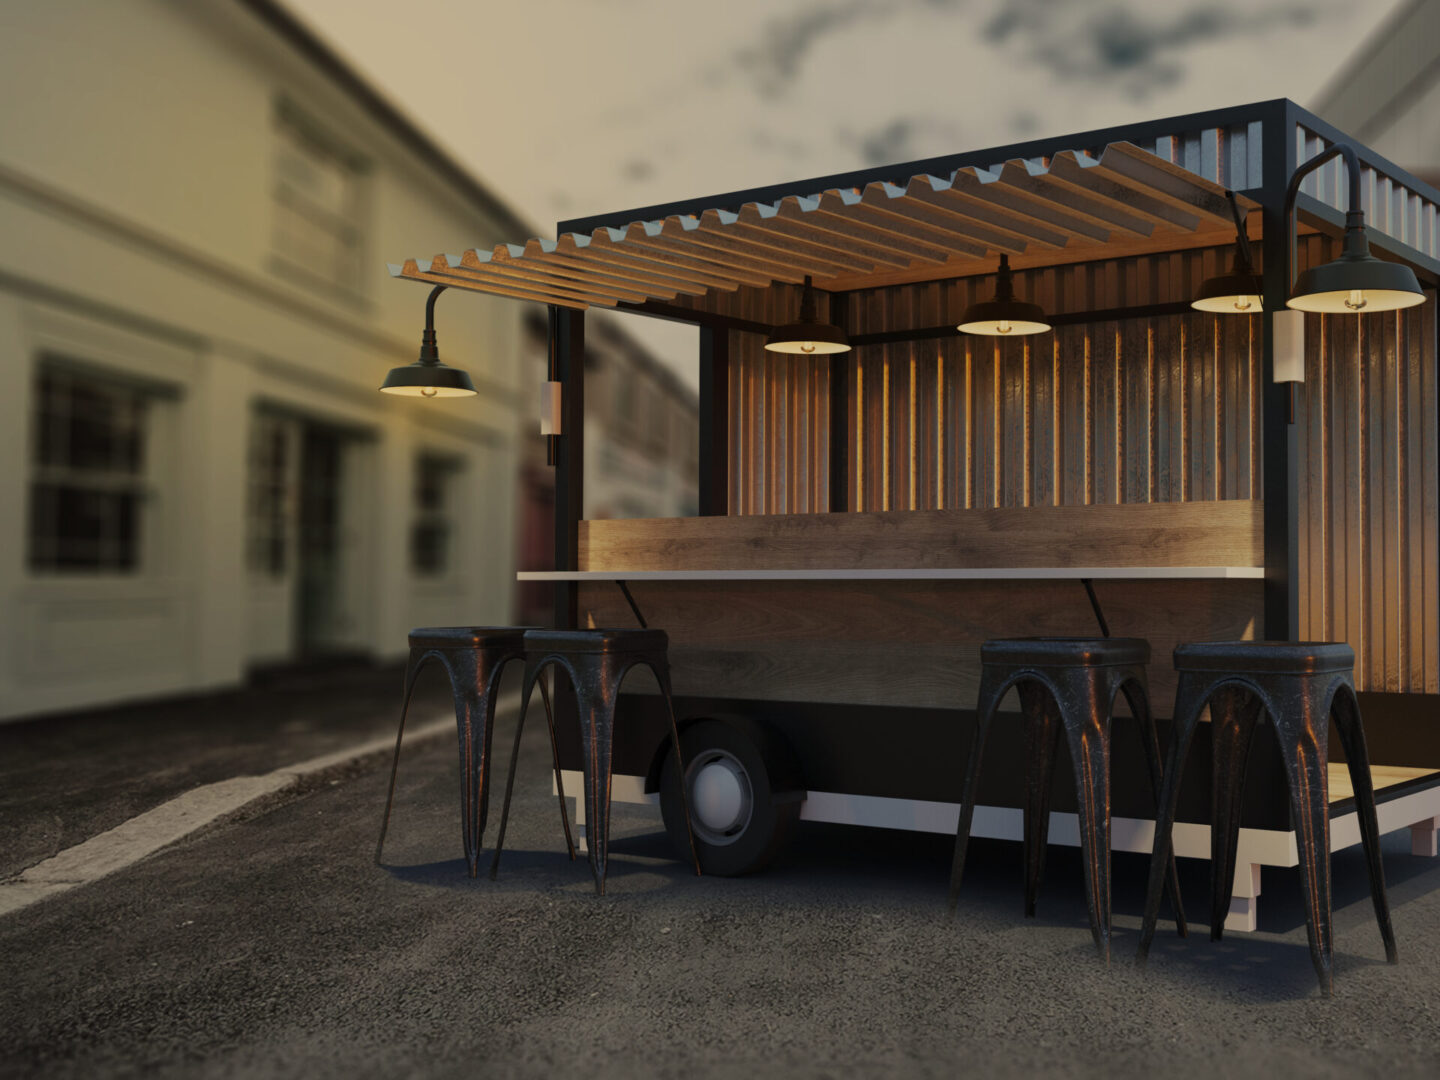 A food truck with tables and chairs outside.